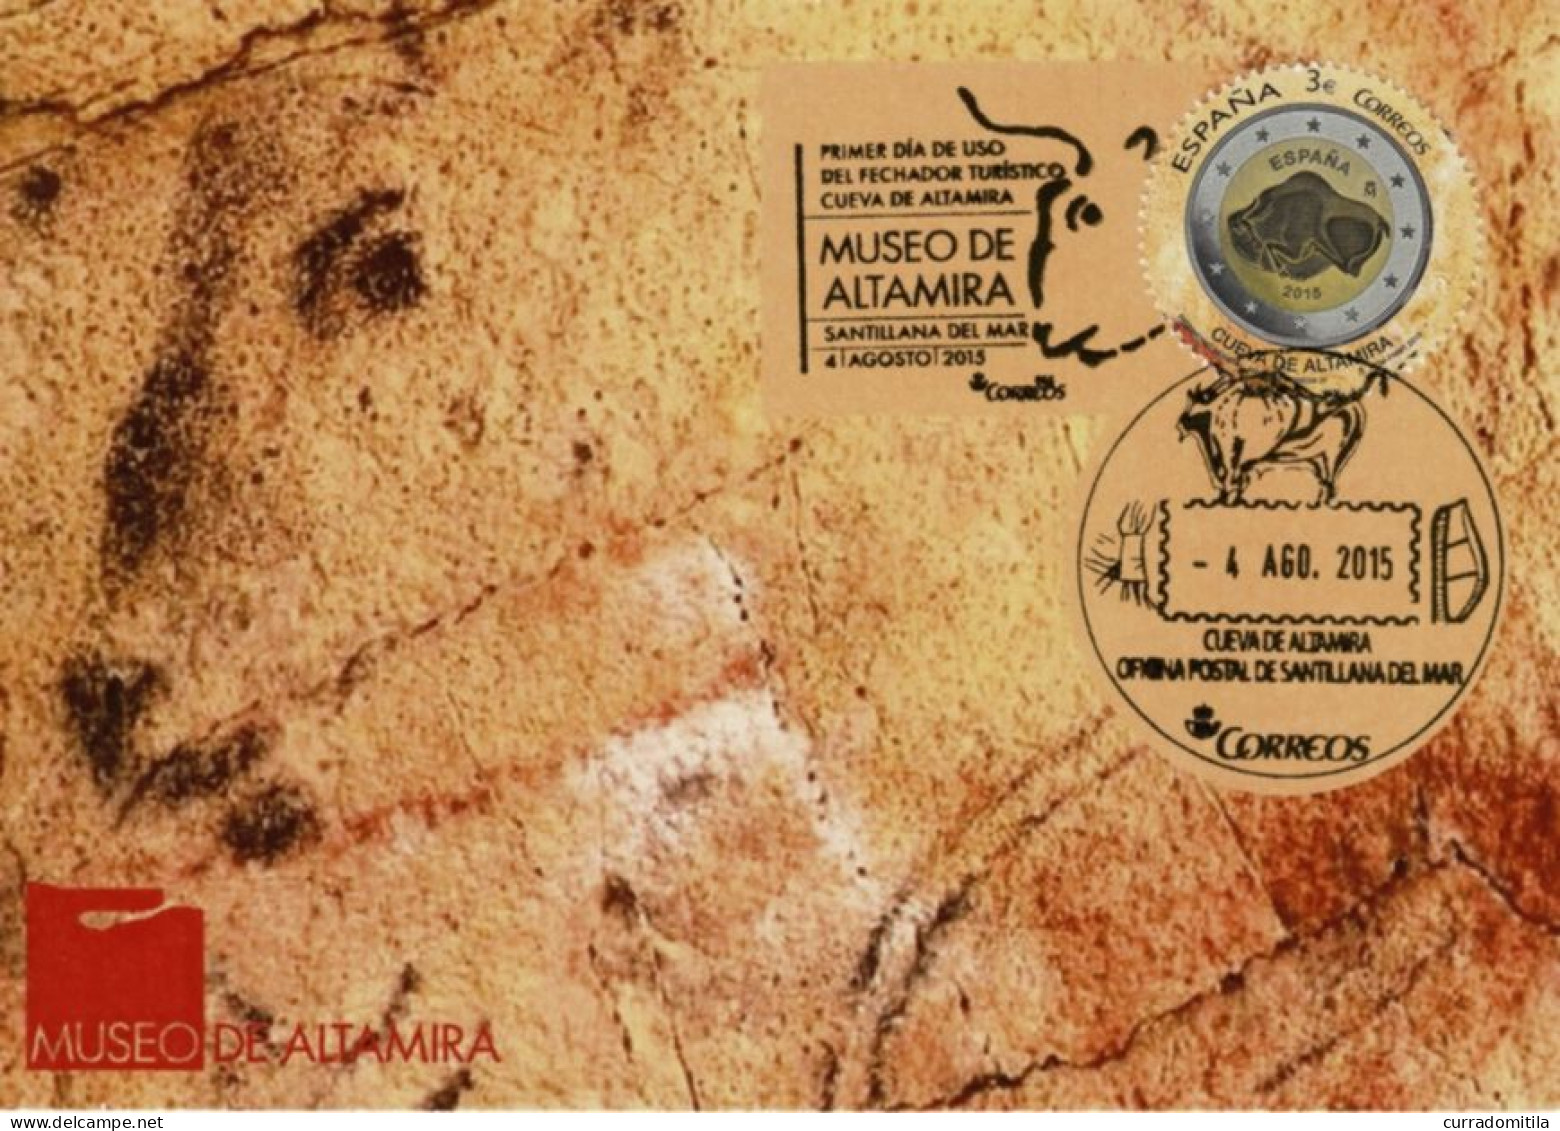 2015 Card (Large) With Rock Art Cancellations, Prehistoric Bison Of Altamita And Special Stamp Of Altamira - Archéologie